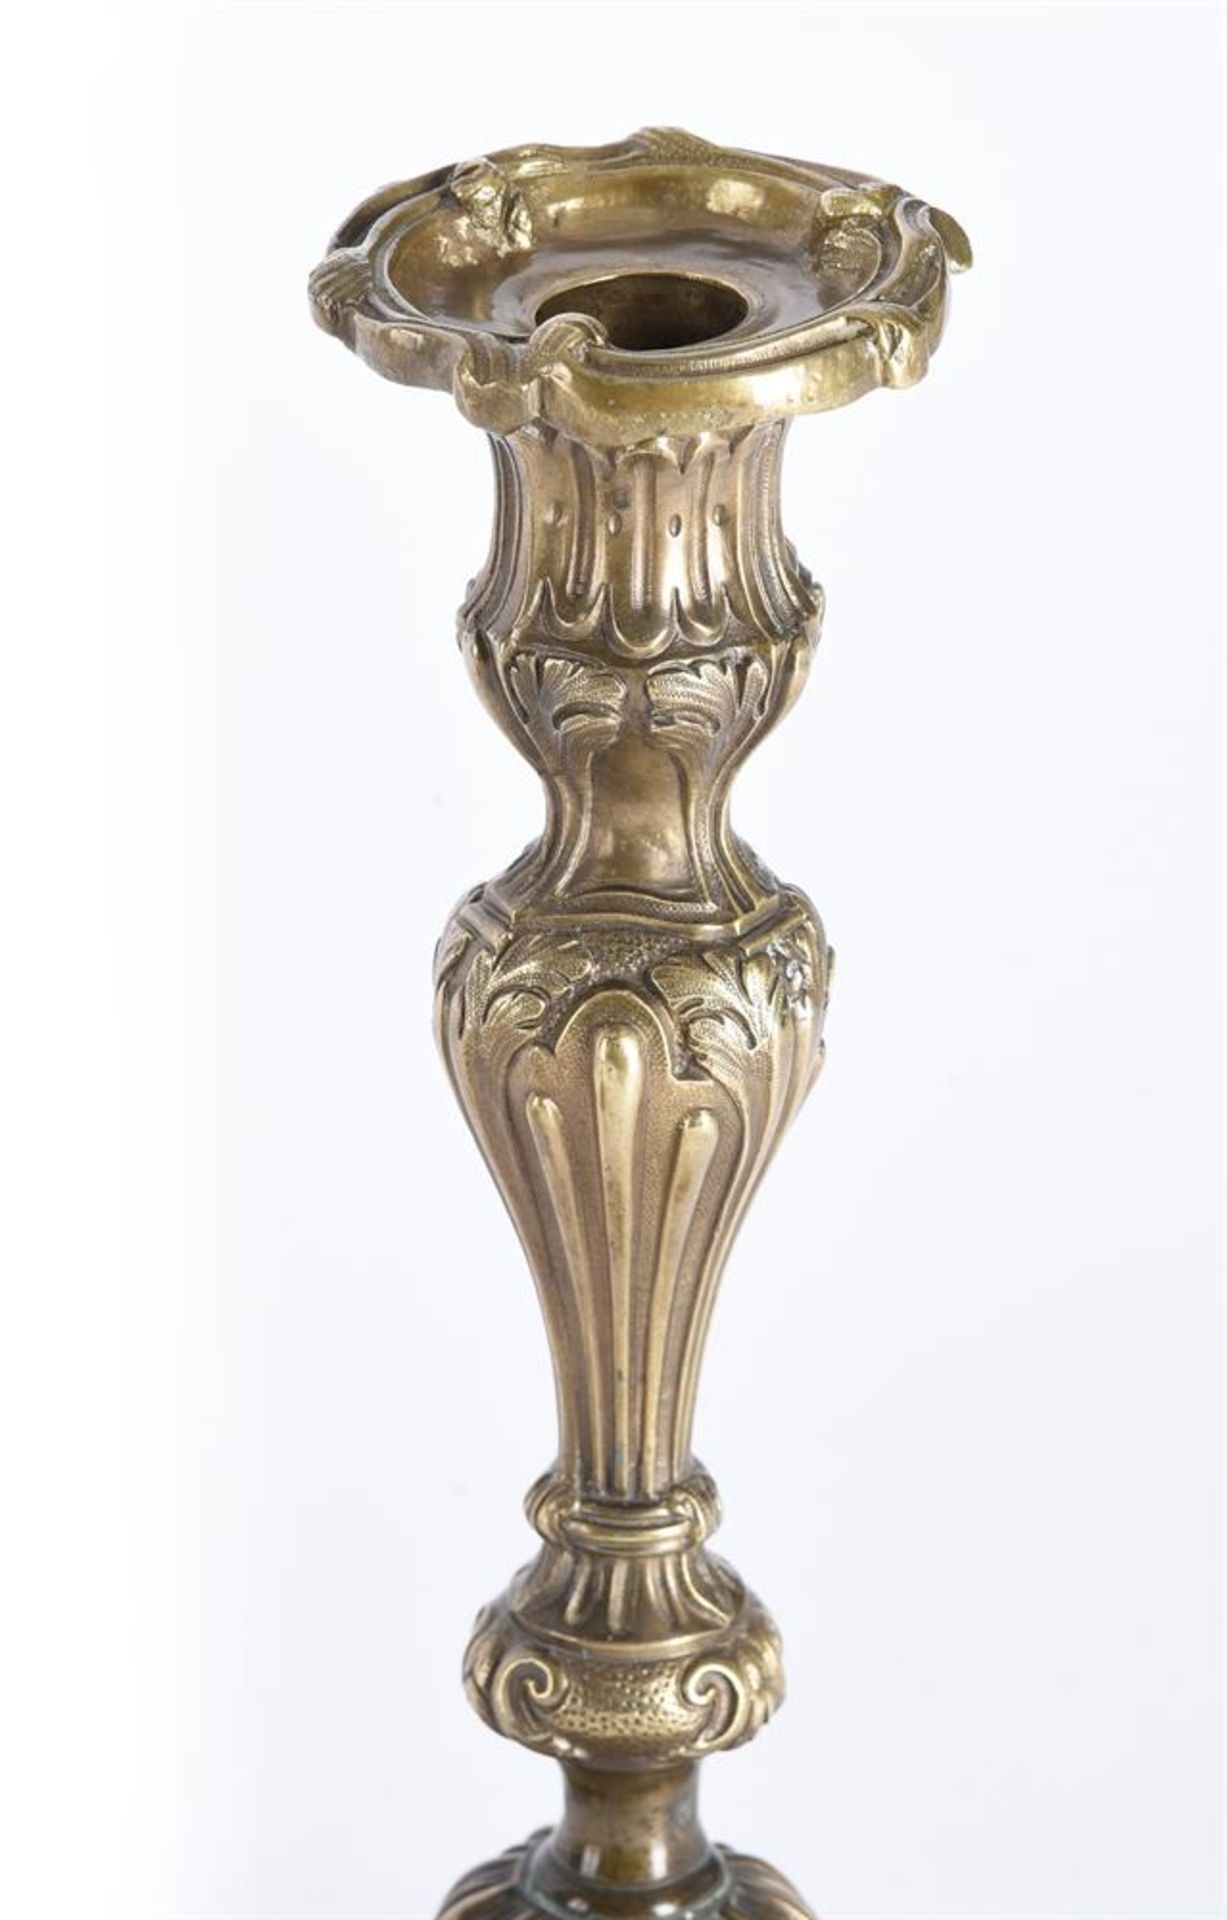 A PAIR OF LOUIS XV BRONZE CANDLESTICKS, MID 18TH CENTURY - Image 2 of 3